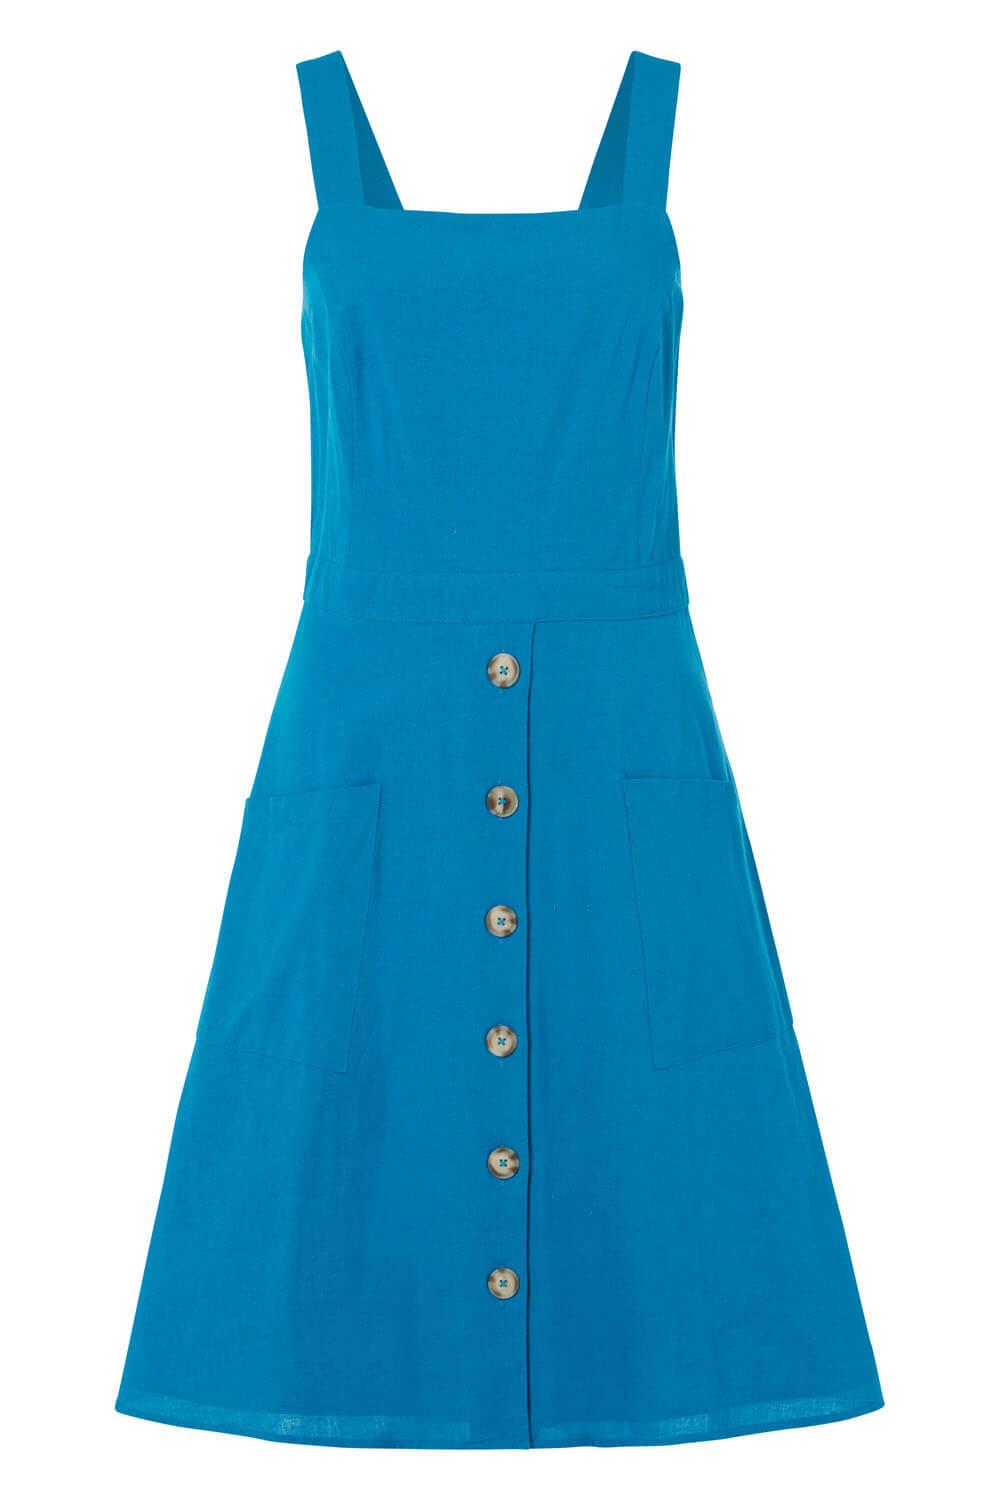 Turquoise Fit and Flare Button Dress, Image 4 of 4